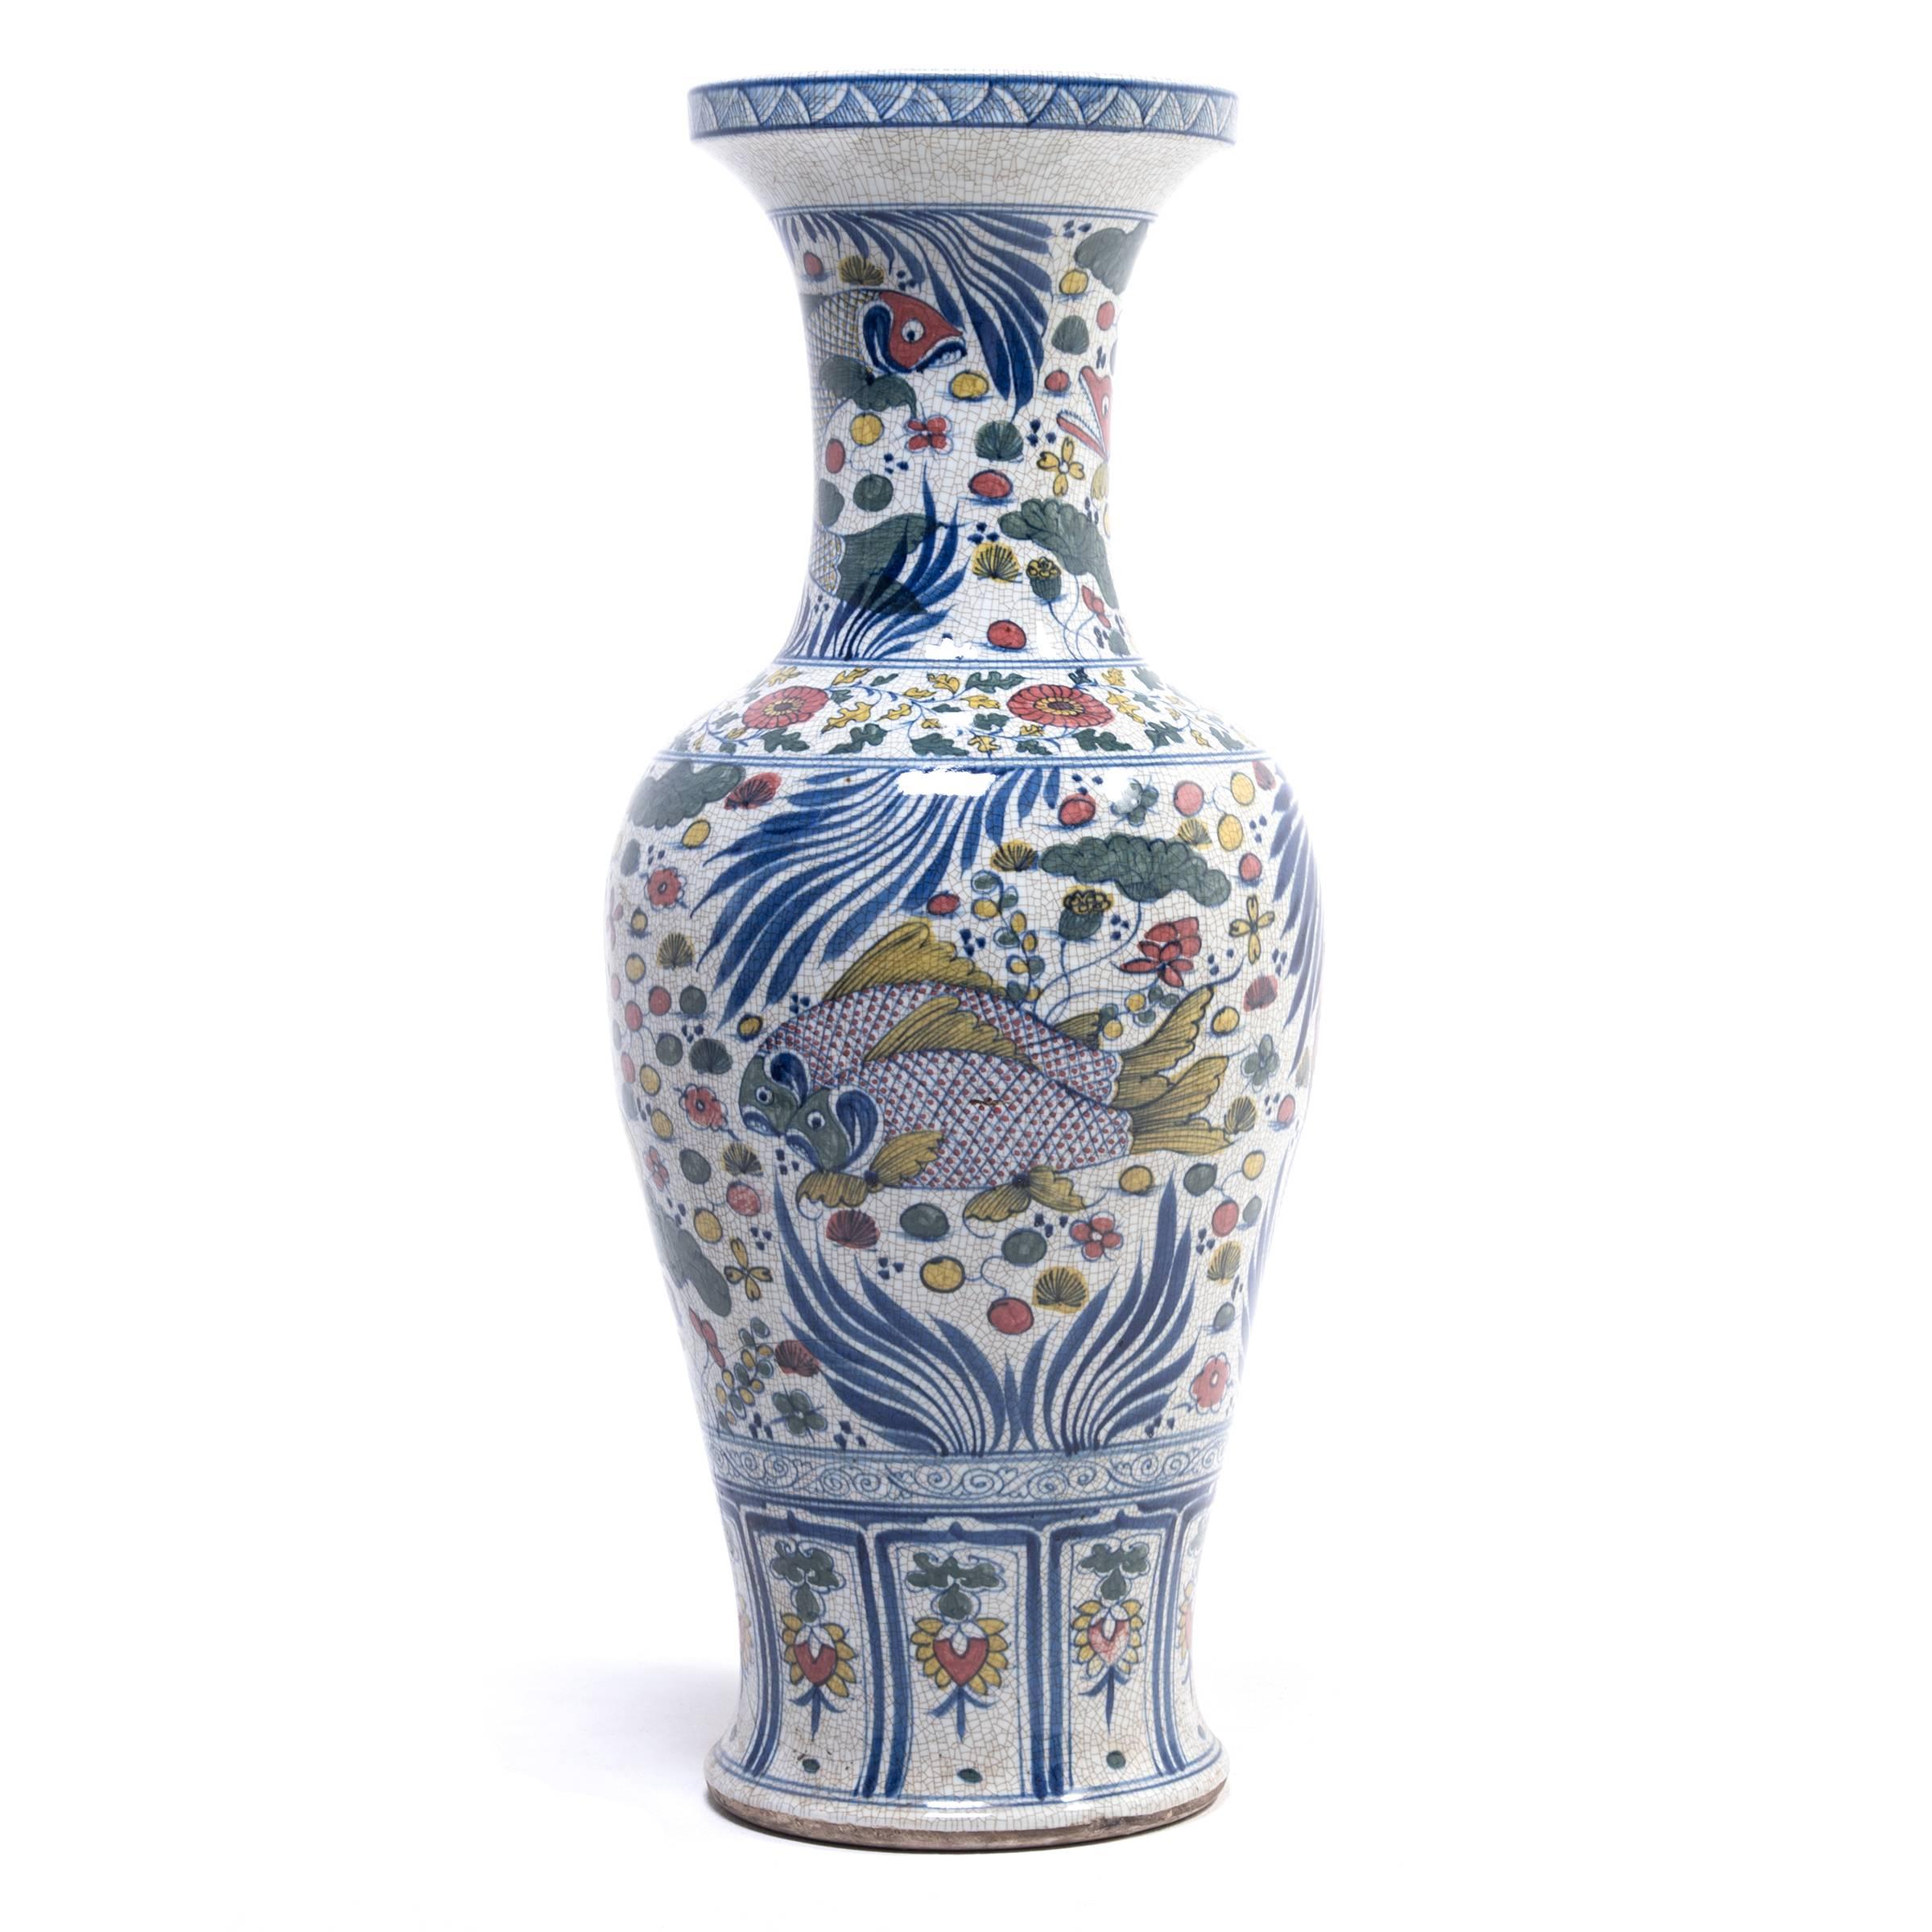 Hand-sculpted by an artisan from China's Jiangxi province, these contemporary standing vases pay colorful tribute to the time-honored style of wucai ware. Translated as “five-color,” wucai was an innovation of the Ming dynasty that employed several